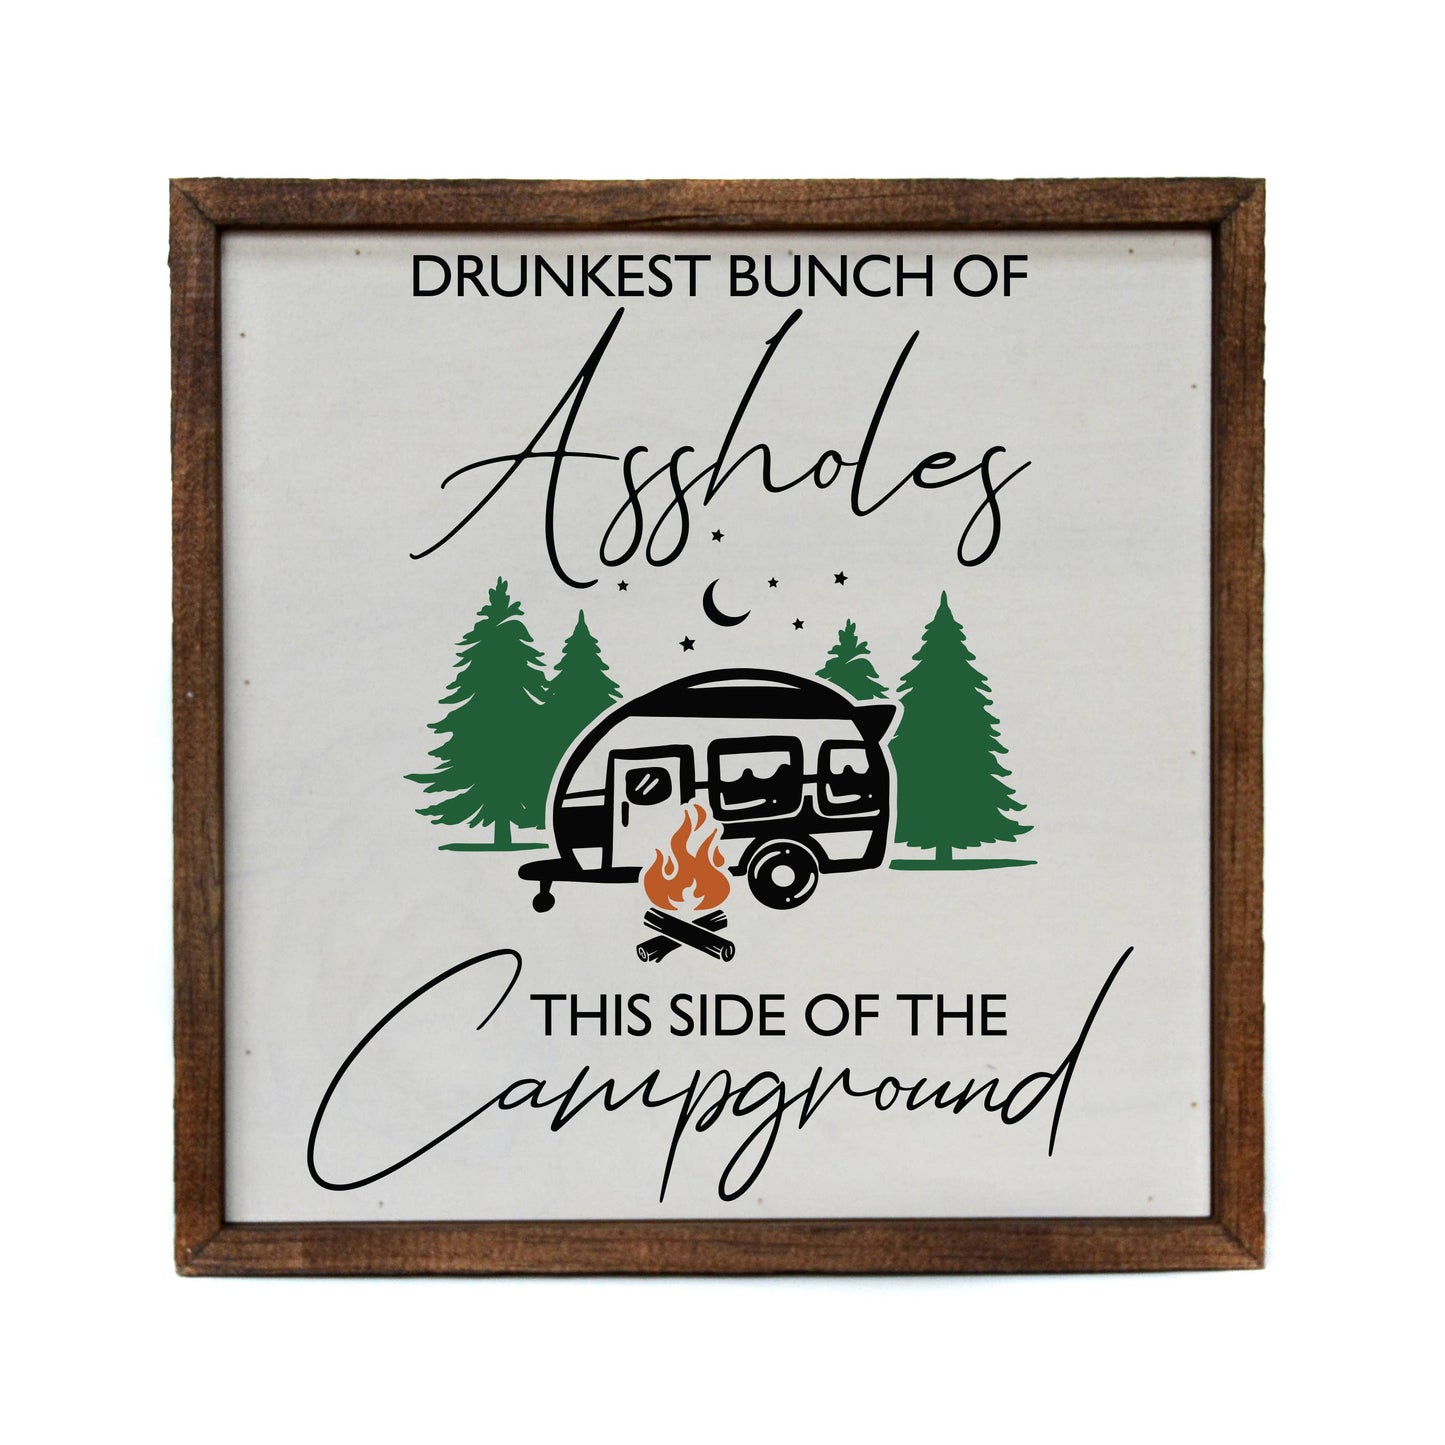 Drunkest Bunch Of A**holes This Side of the Campground 10x10 Wooden Sign